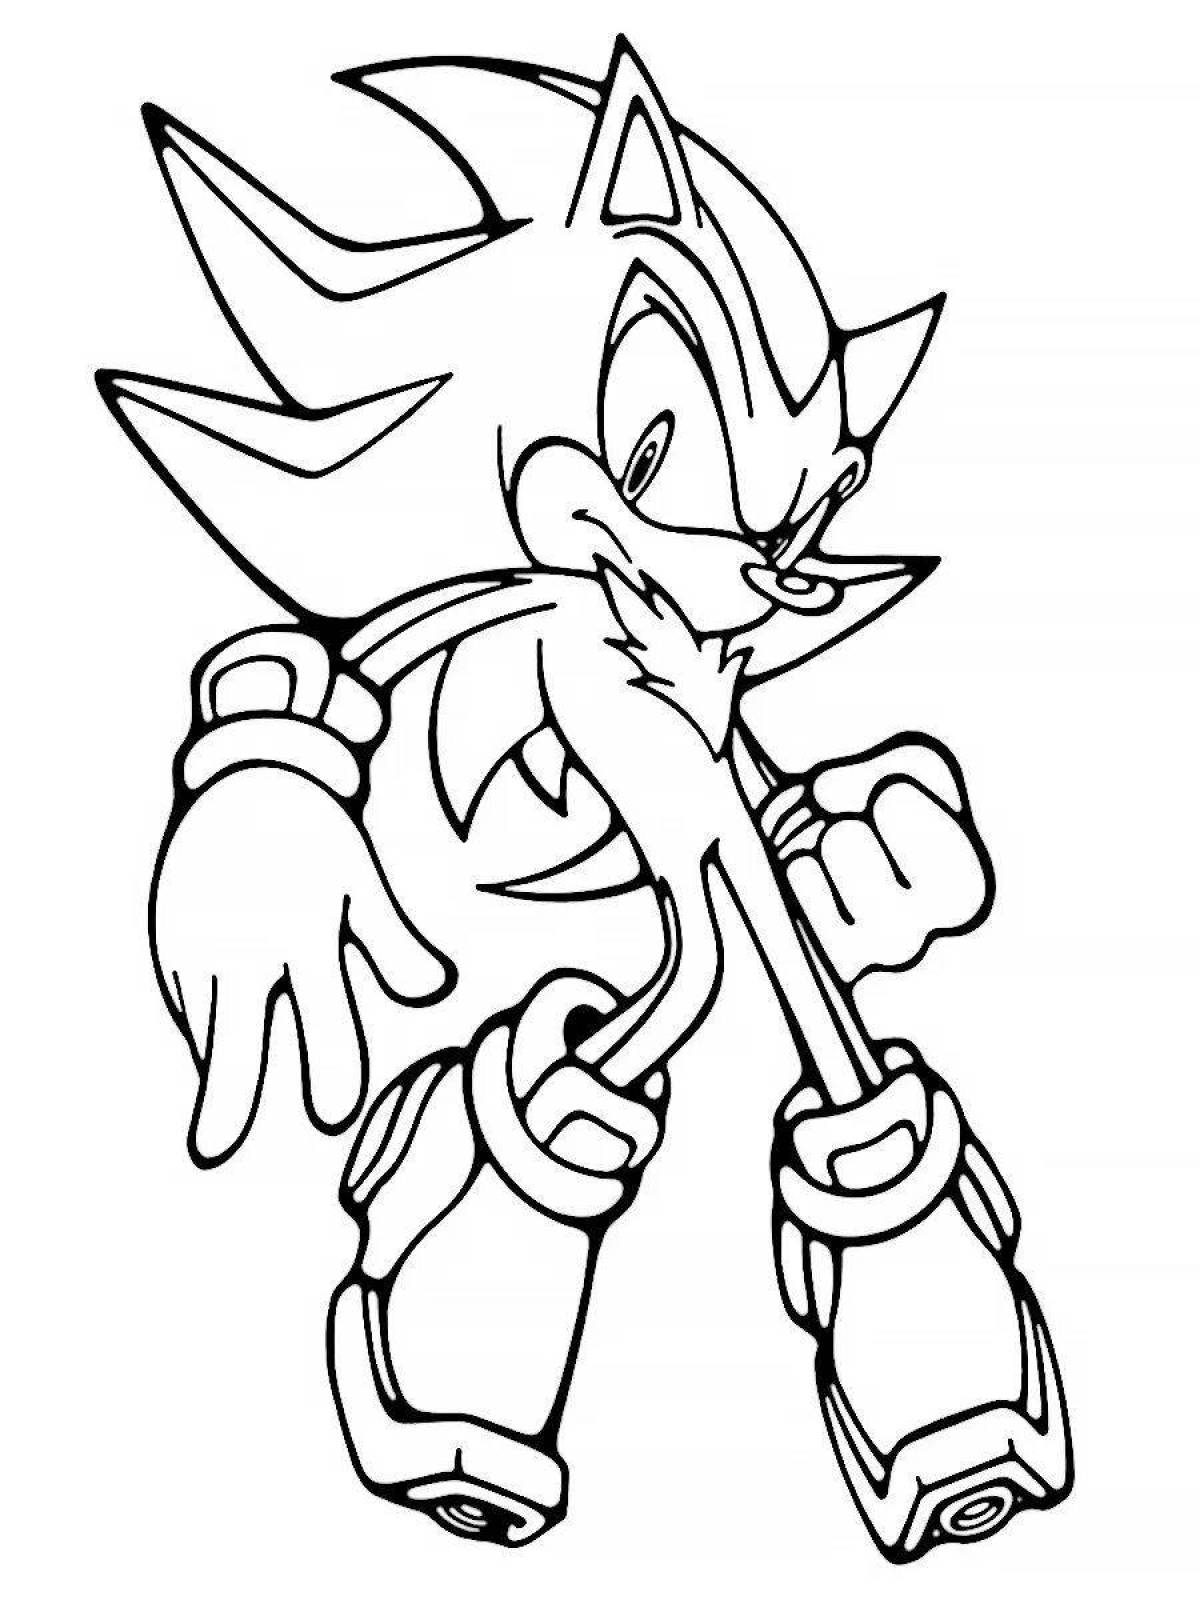 Darkspine sonic coloring page